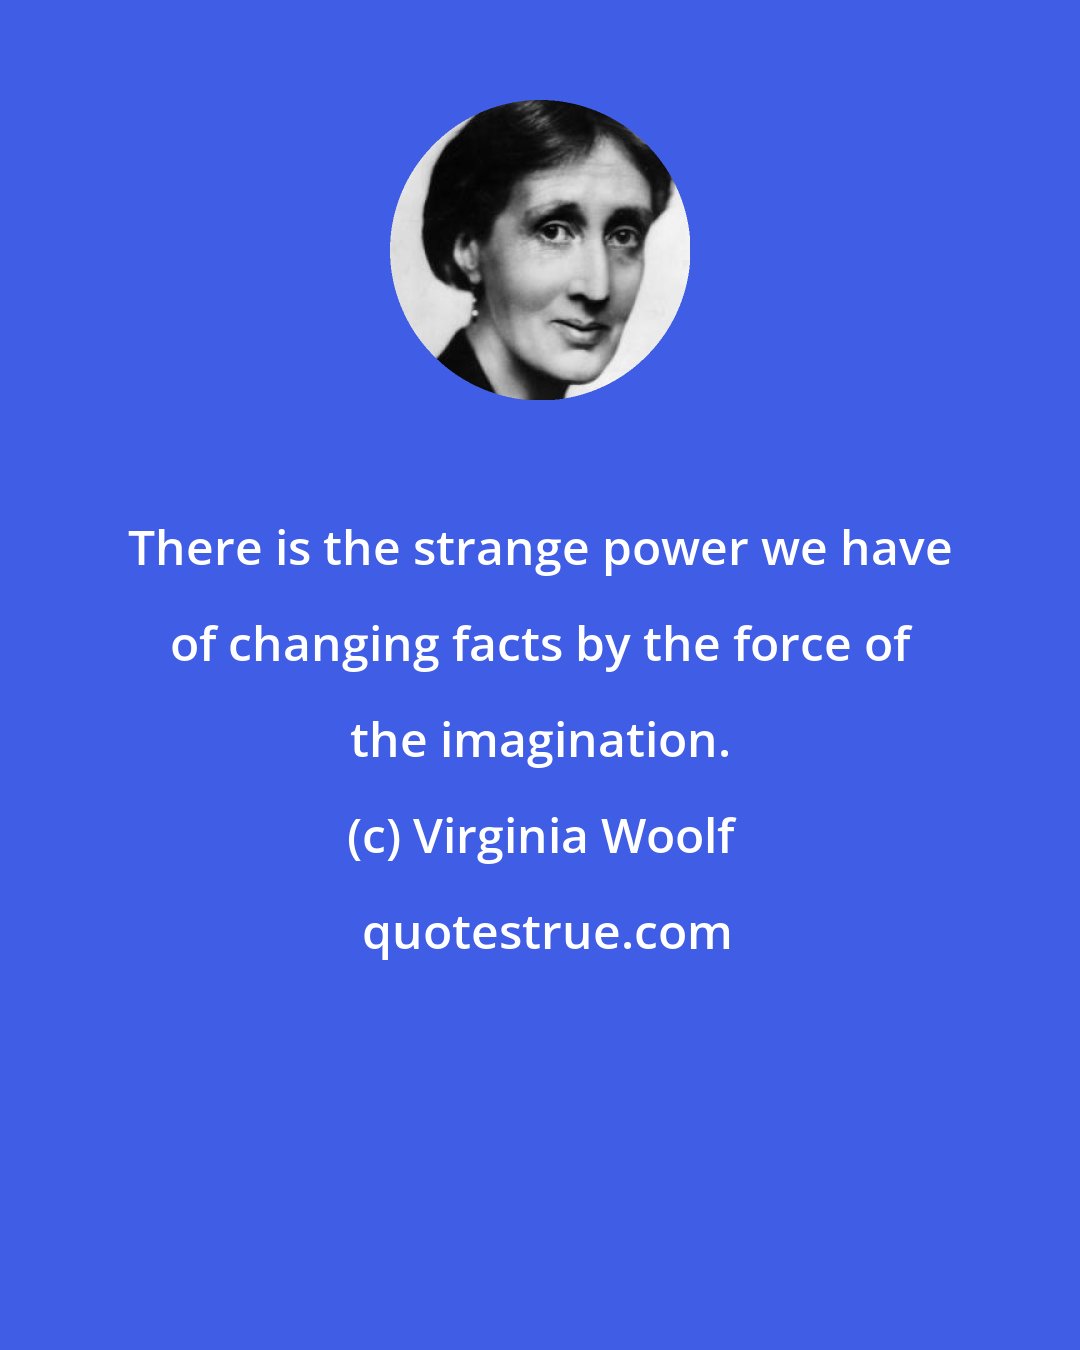 Virginia Woolf: There is the strange power we have of changing facts by the force of the imagination.